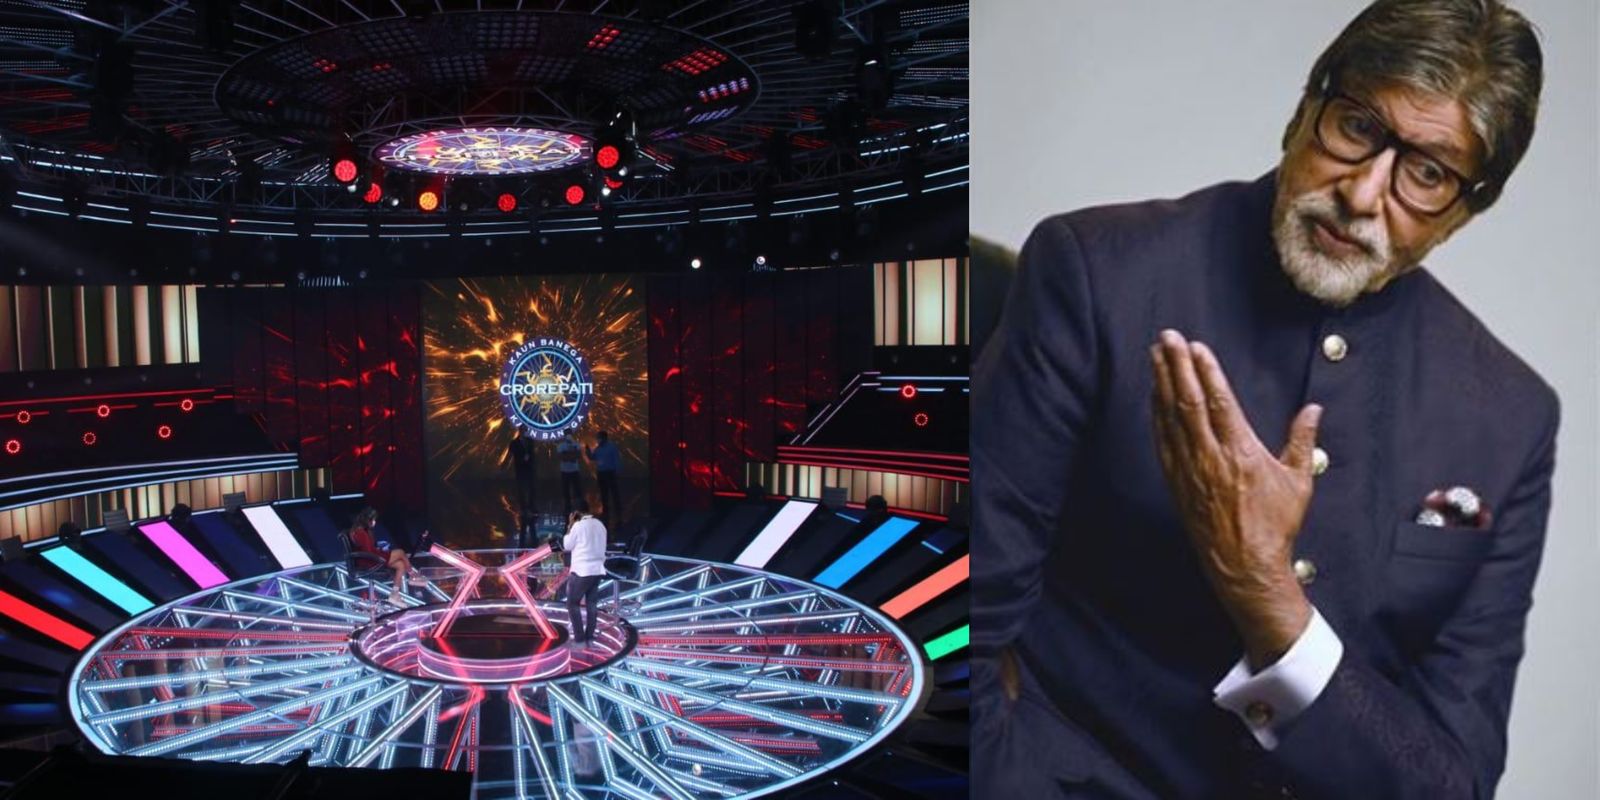 Amitabh Bachchan To Begin Shooting For Kaun Banega Crorepati 12 Episodes From September 7; Here's What Will Change 